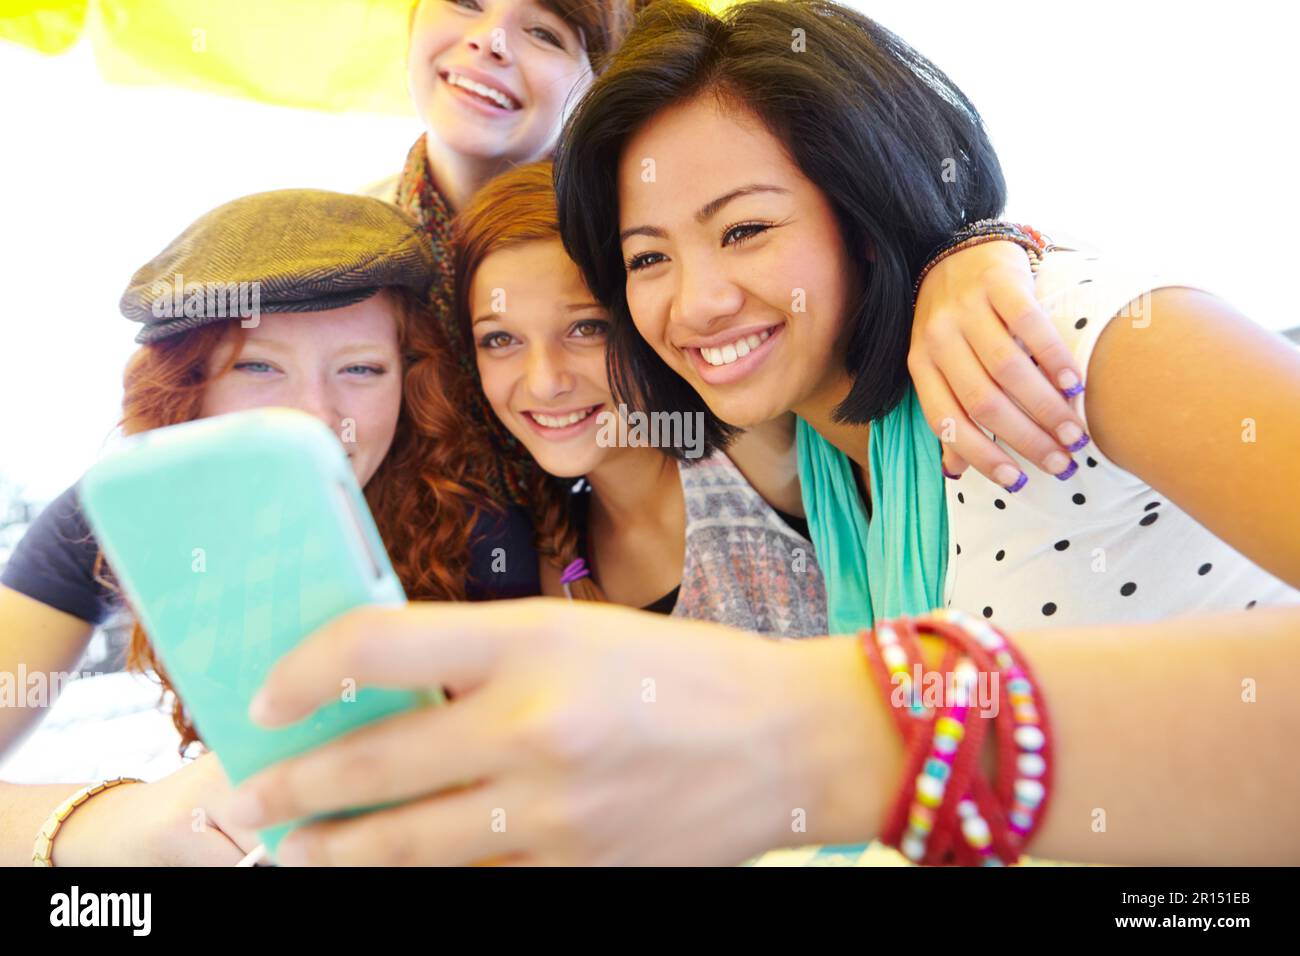 Lets update our profile pictures. A group of adolescent girls laughing as they look at something on a smartphone screen. Stock Photo